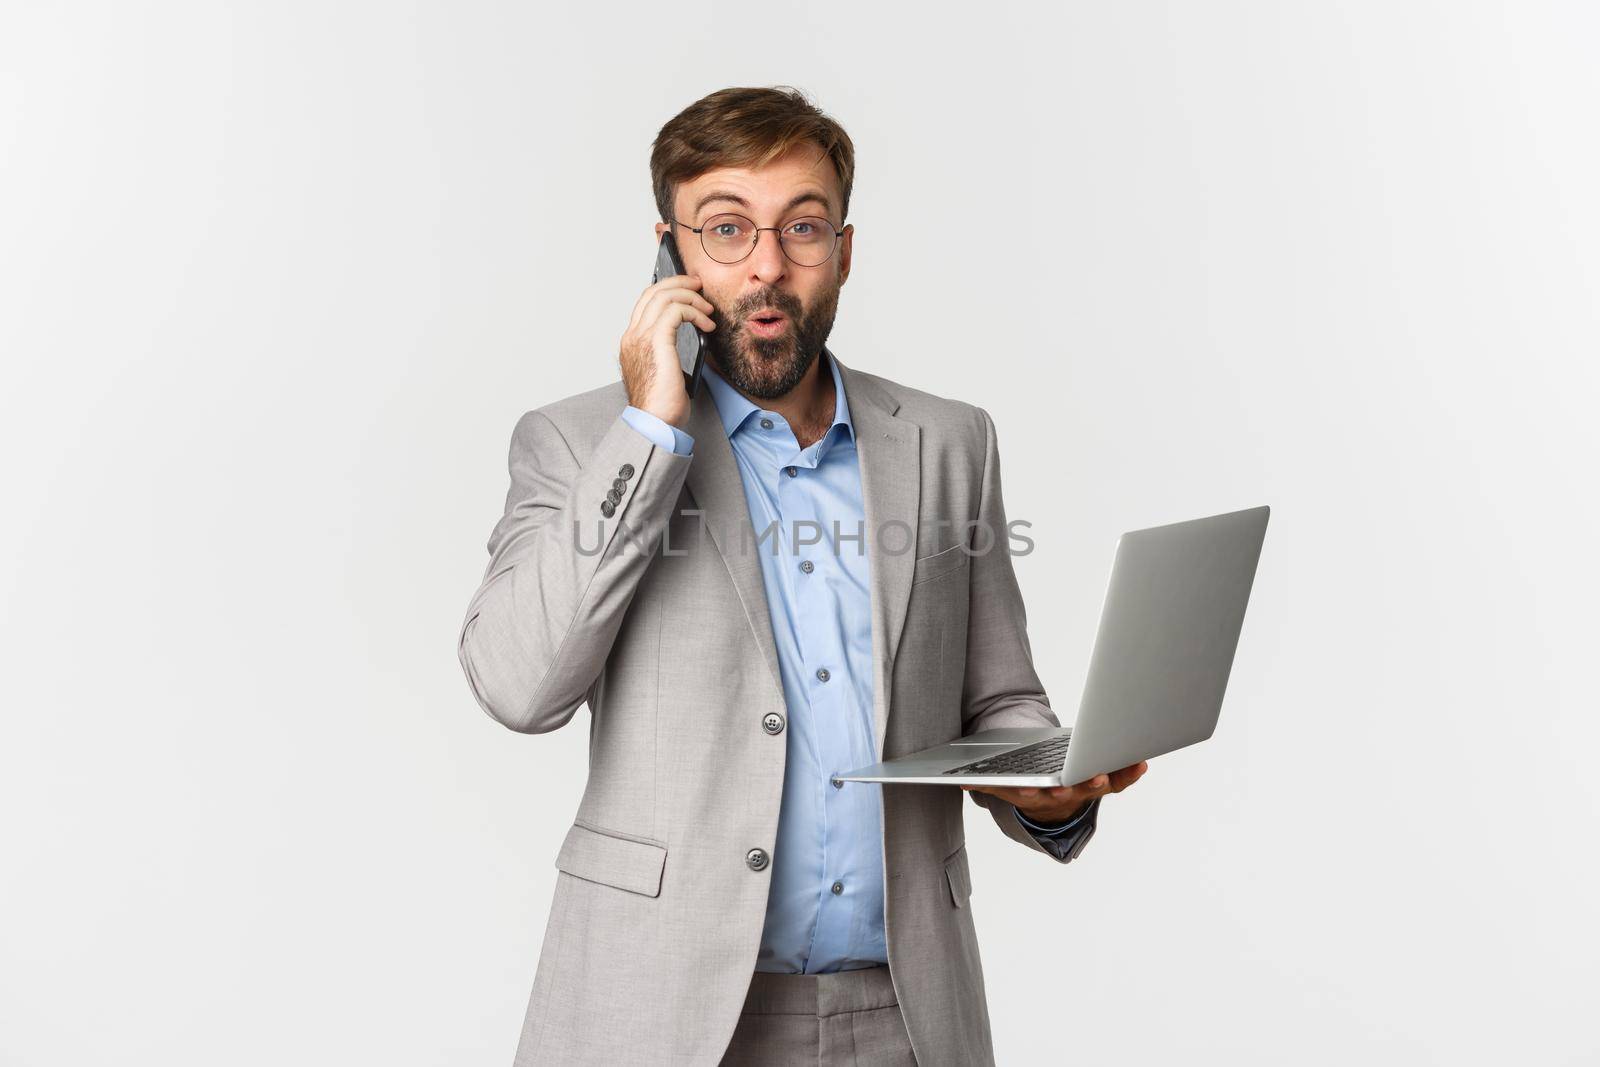 Portrait of handsome businessman in grey suit and glasses, receive good news during phone call, holding laptop, looking satisfied, standing over white background.